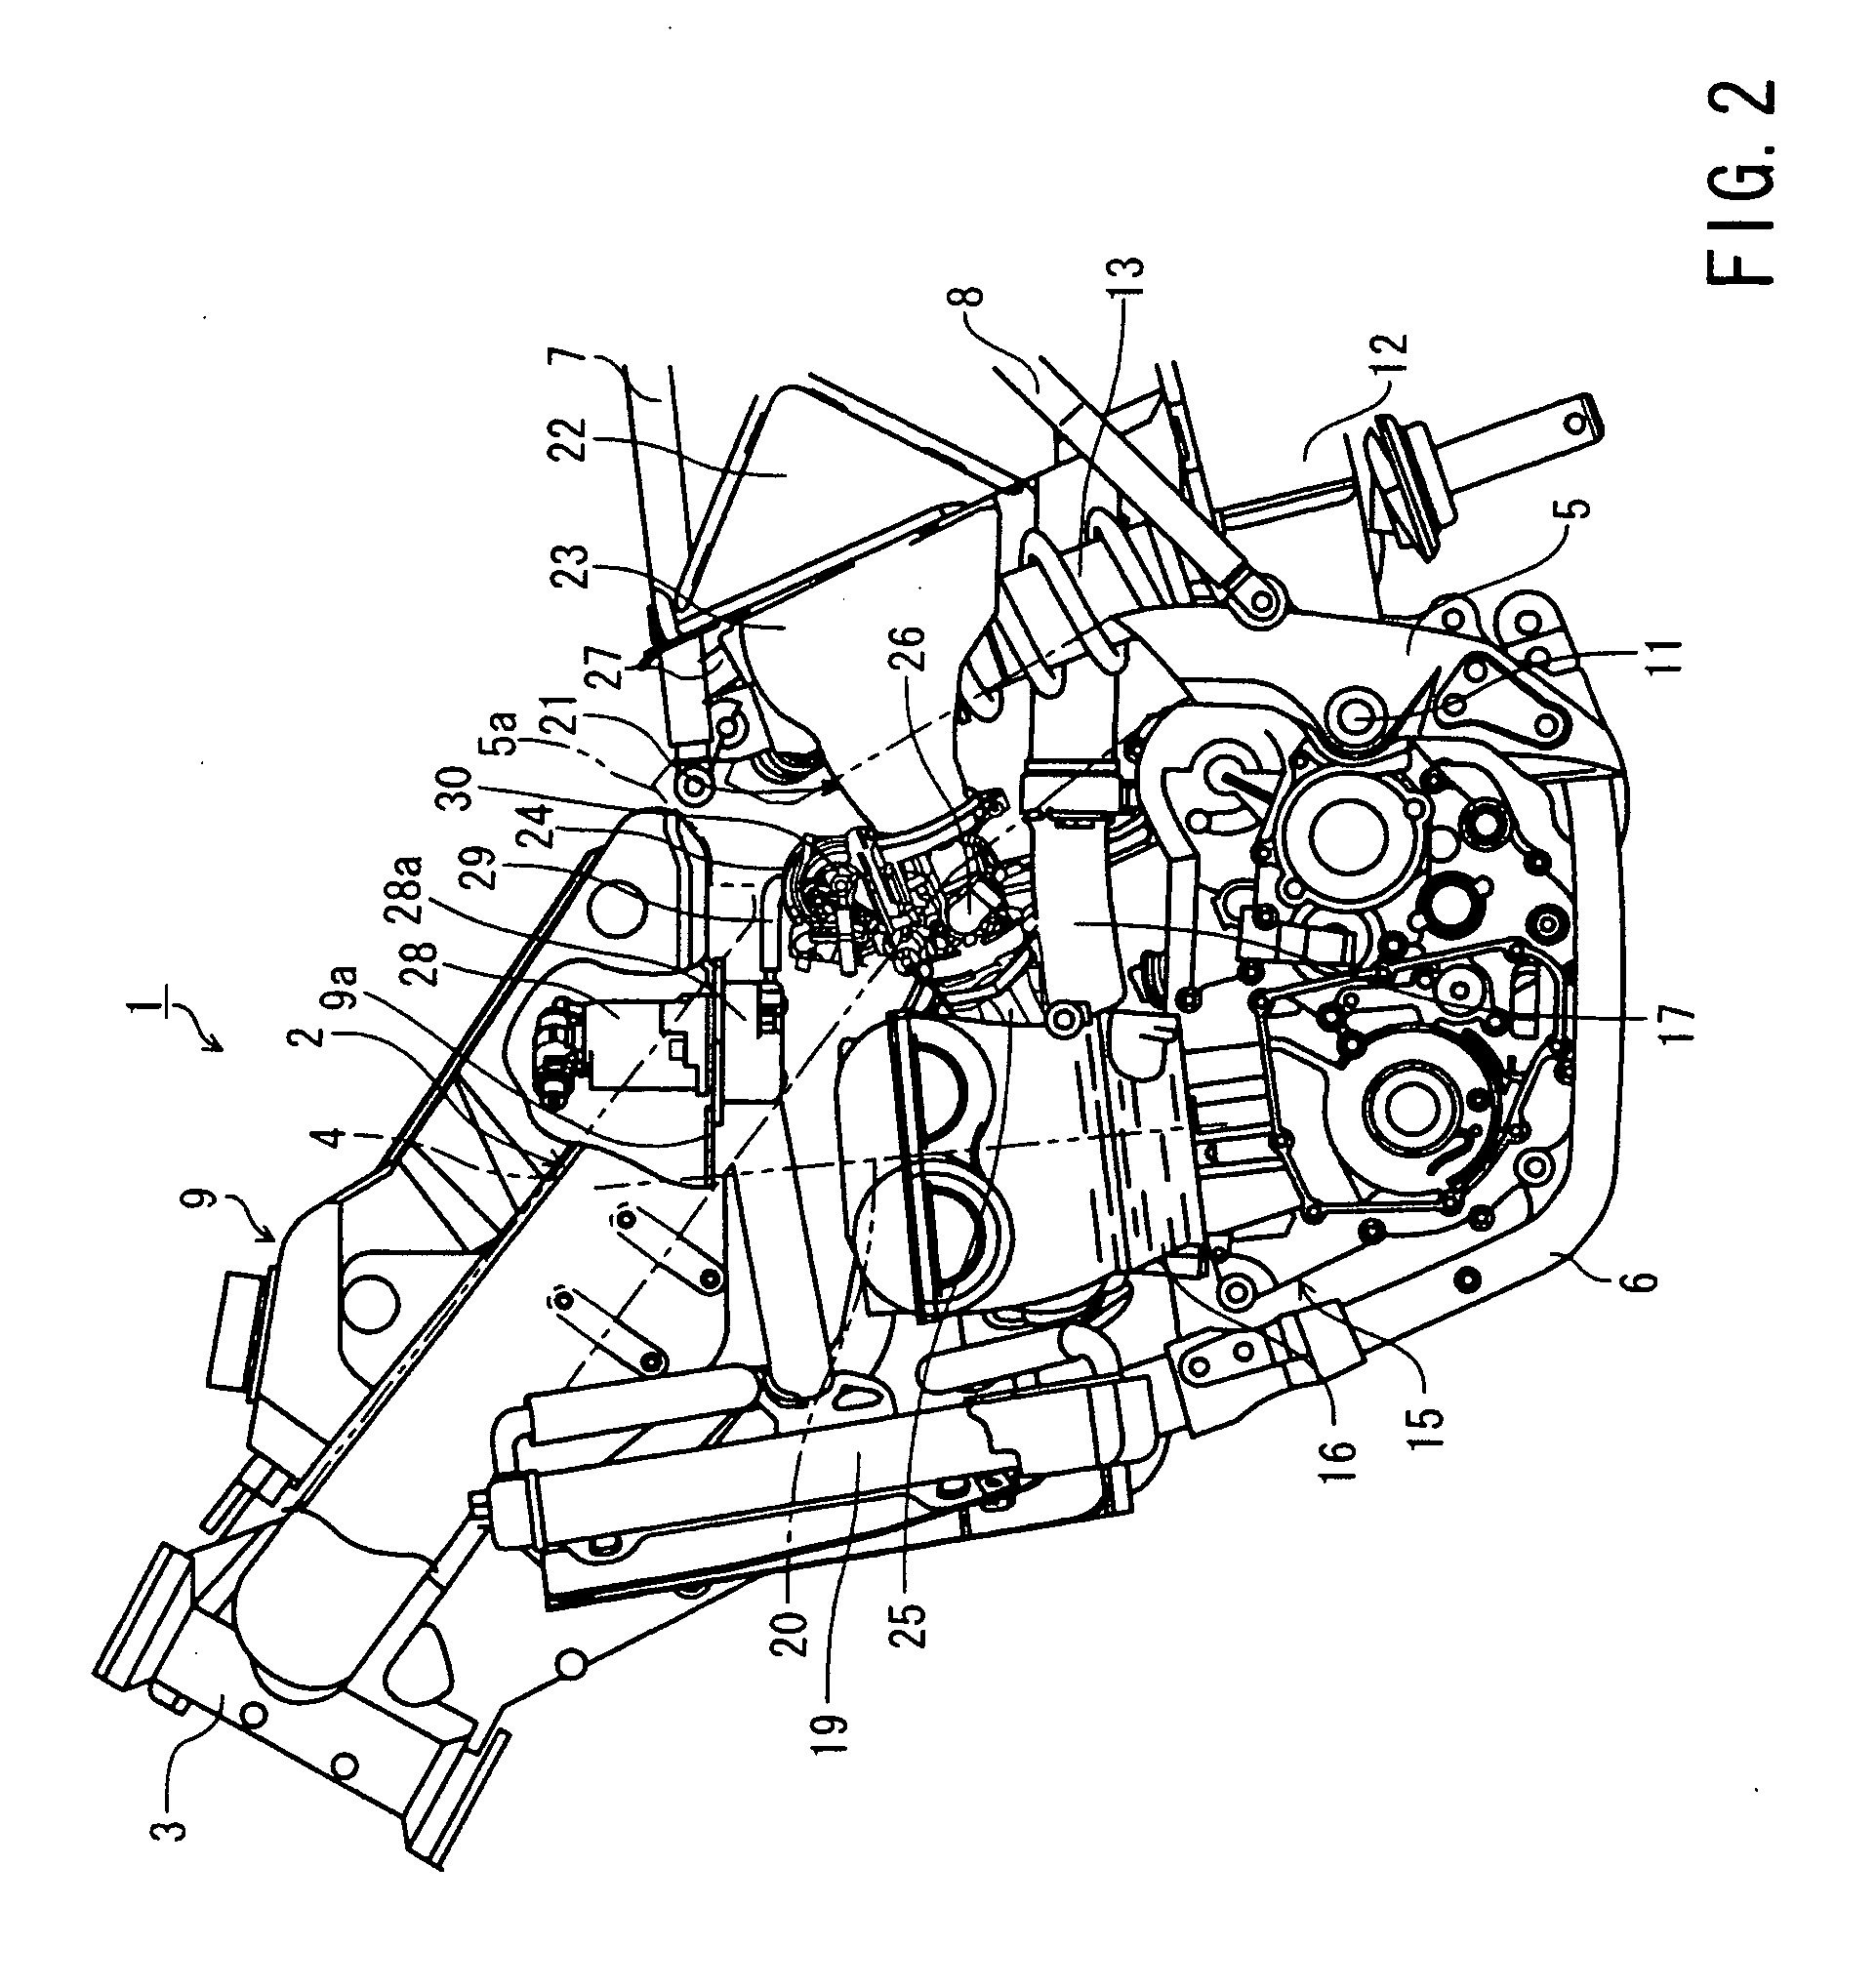 Fuel supply device of motorcycle